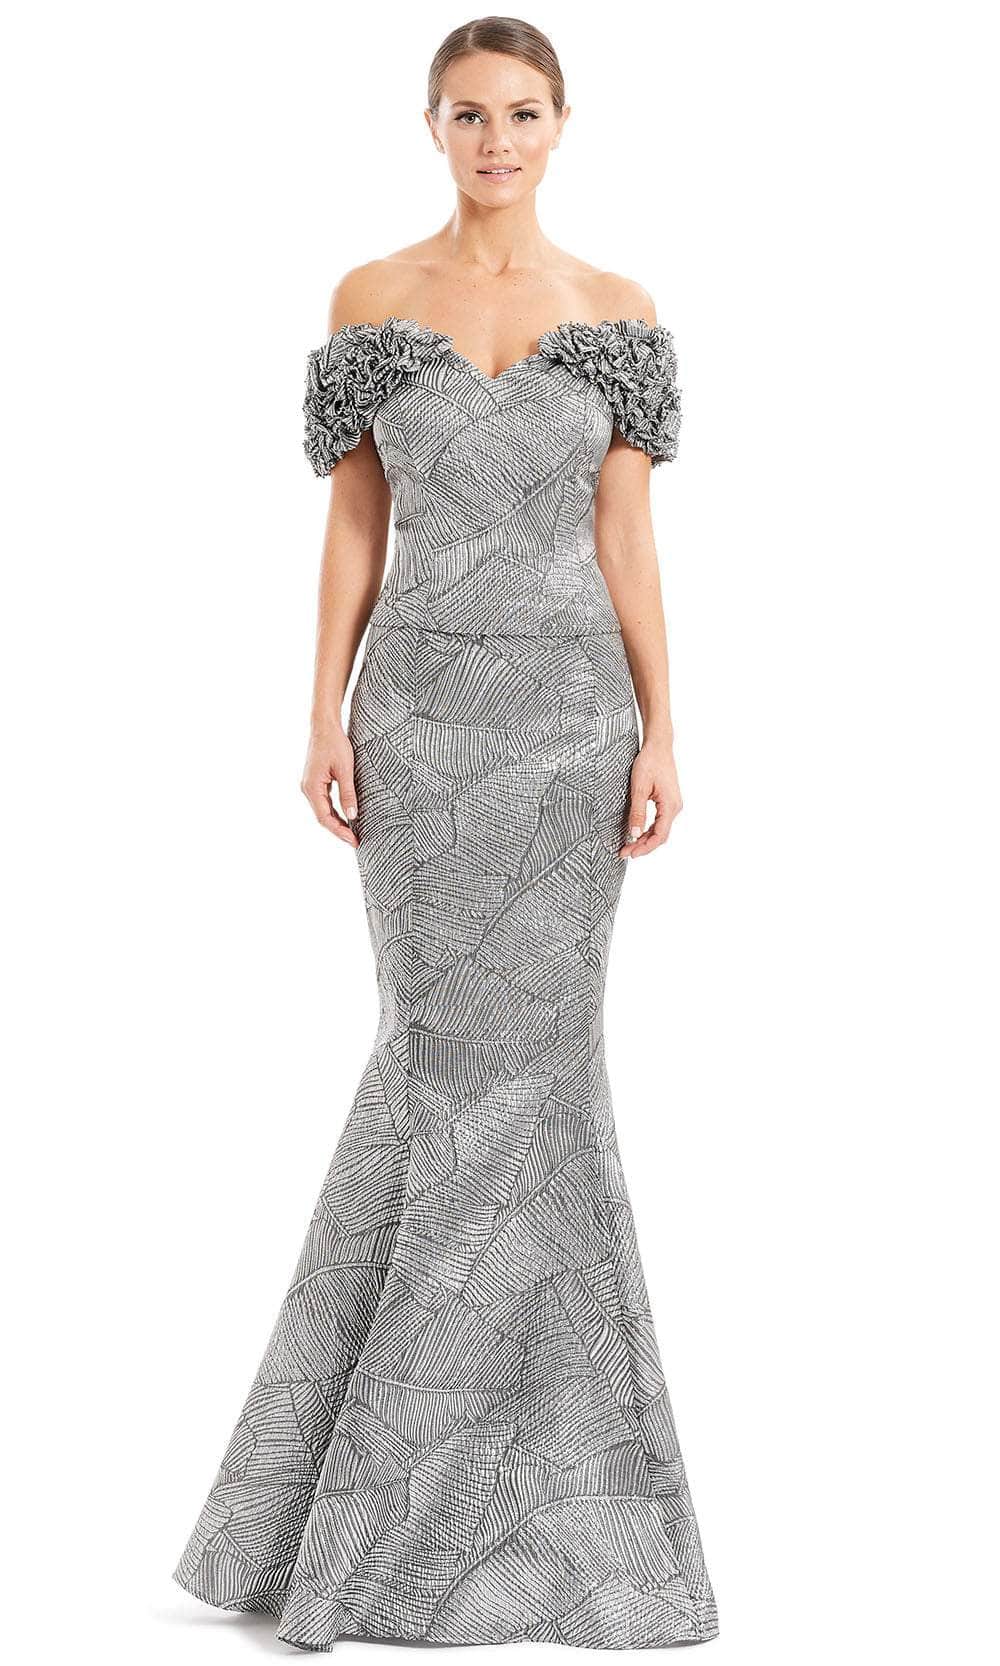 Alexander By Daymor 1650F22 - Ruffled Sleeve Metallic Evening Gown Special Occasion Dress 4 / Silver